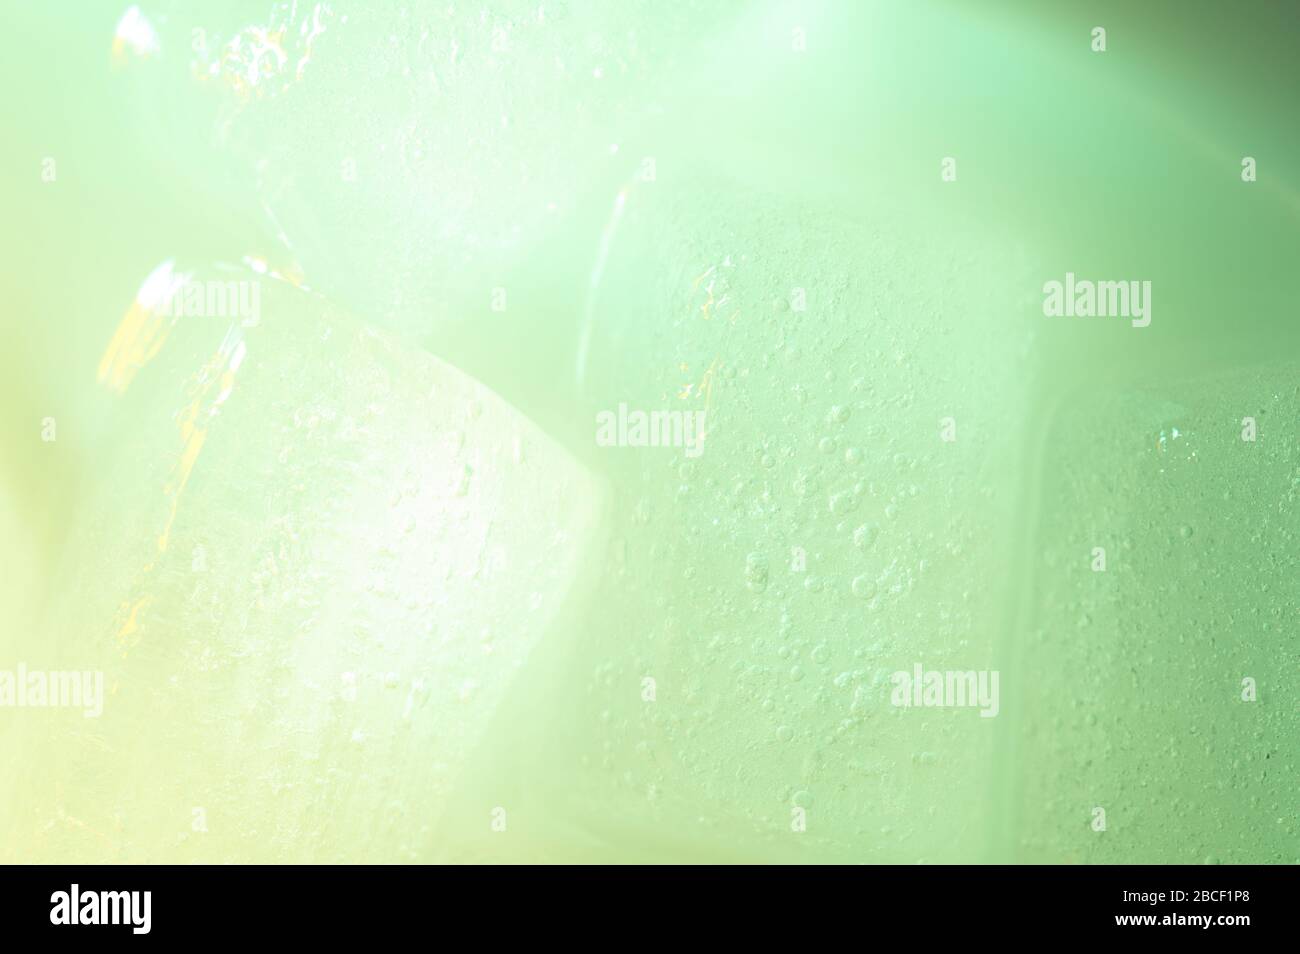 Glowing green ice cube abstract background close up view Stock Photo